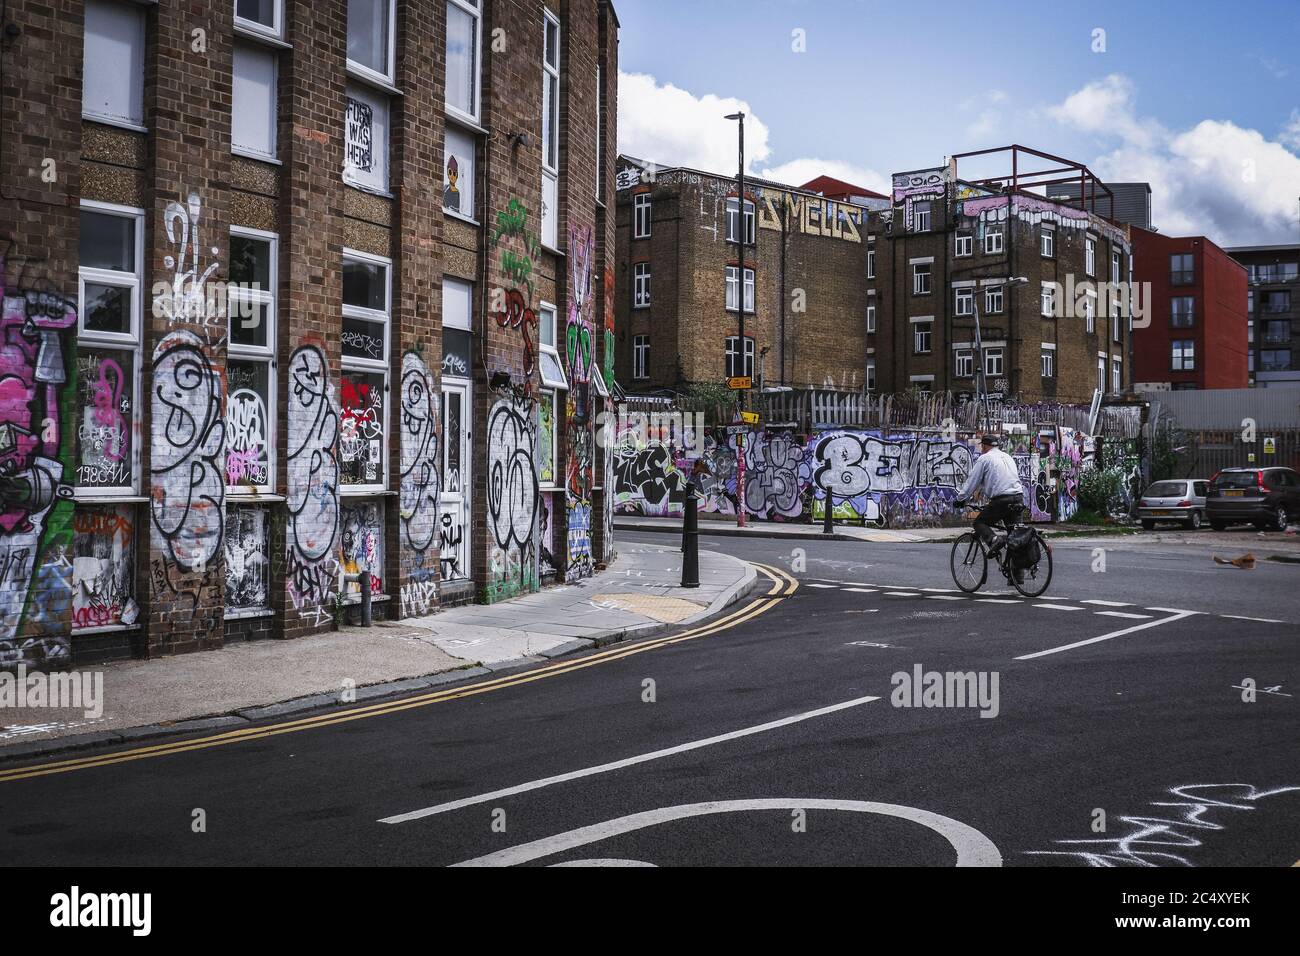 man rides a bike past graffiti on a derelict building in Hackney Wick in East London,during covid-19 lockdown Stock Photo